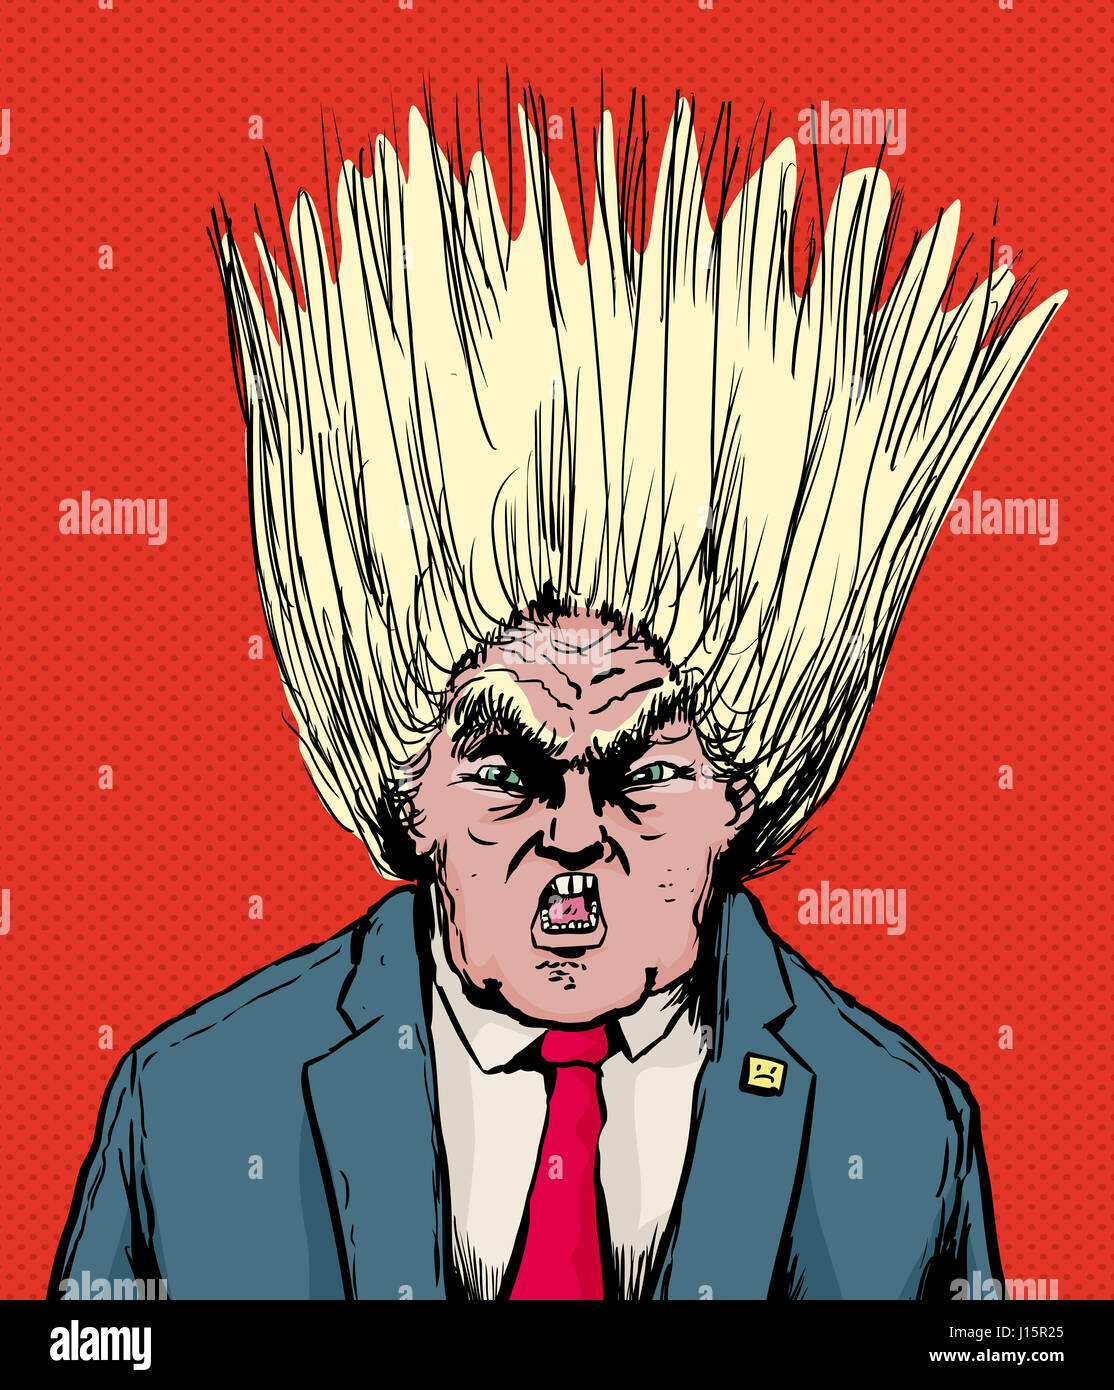 April 18, 2017. Caricature of outraged Donald Trump with hairdo blown out Stock Photo